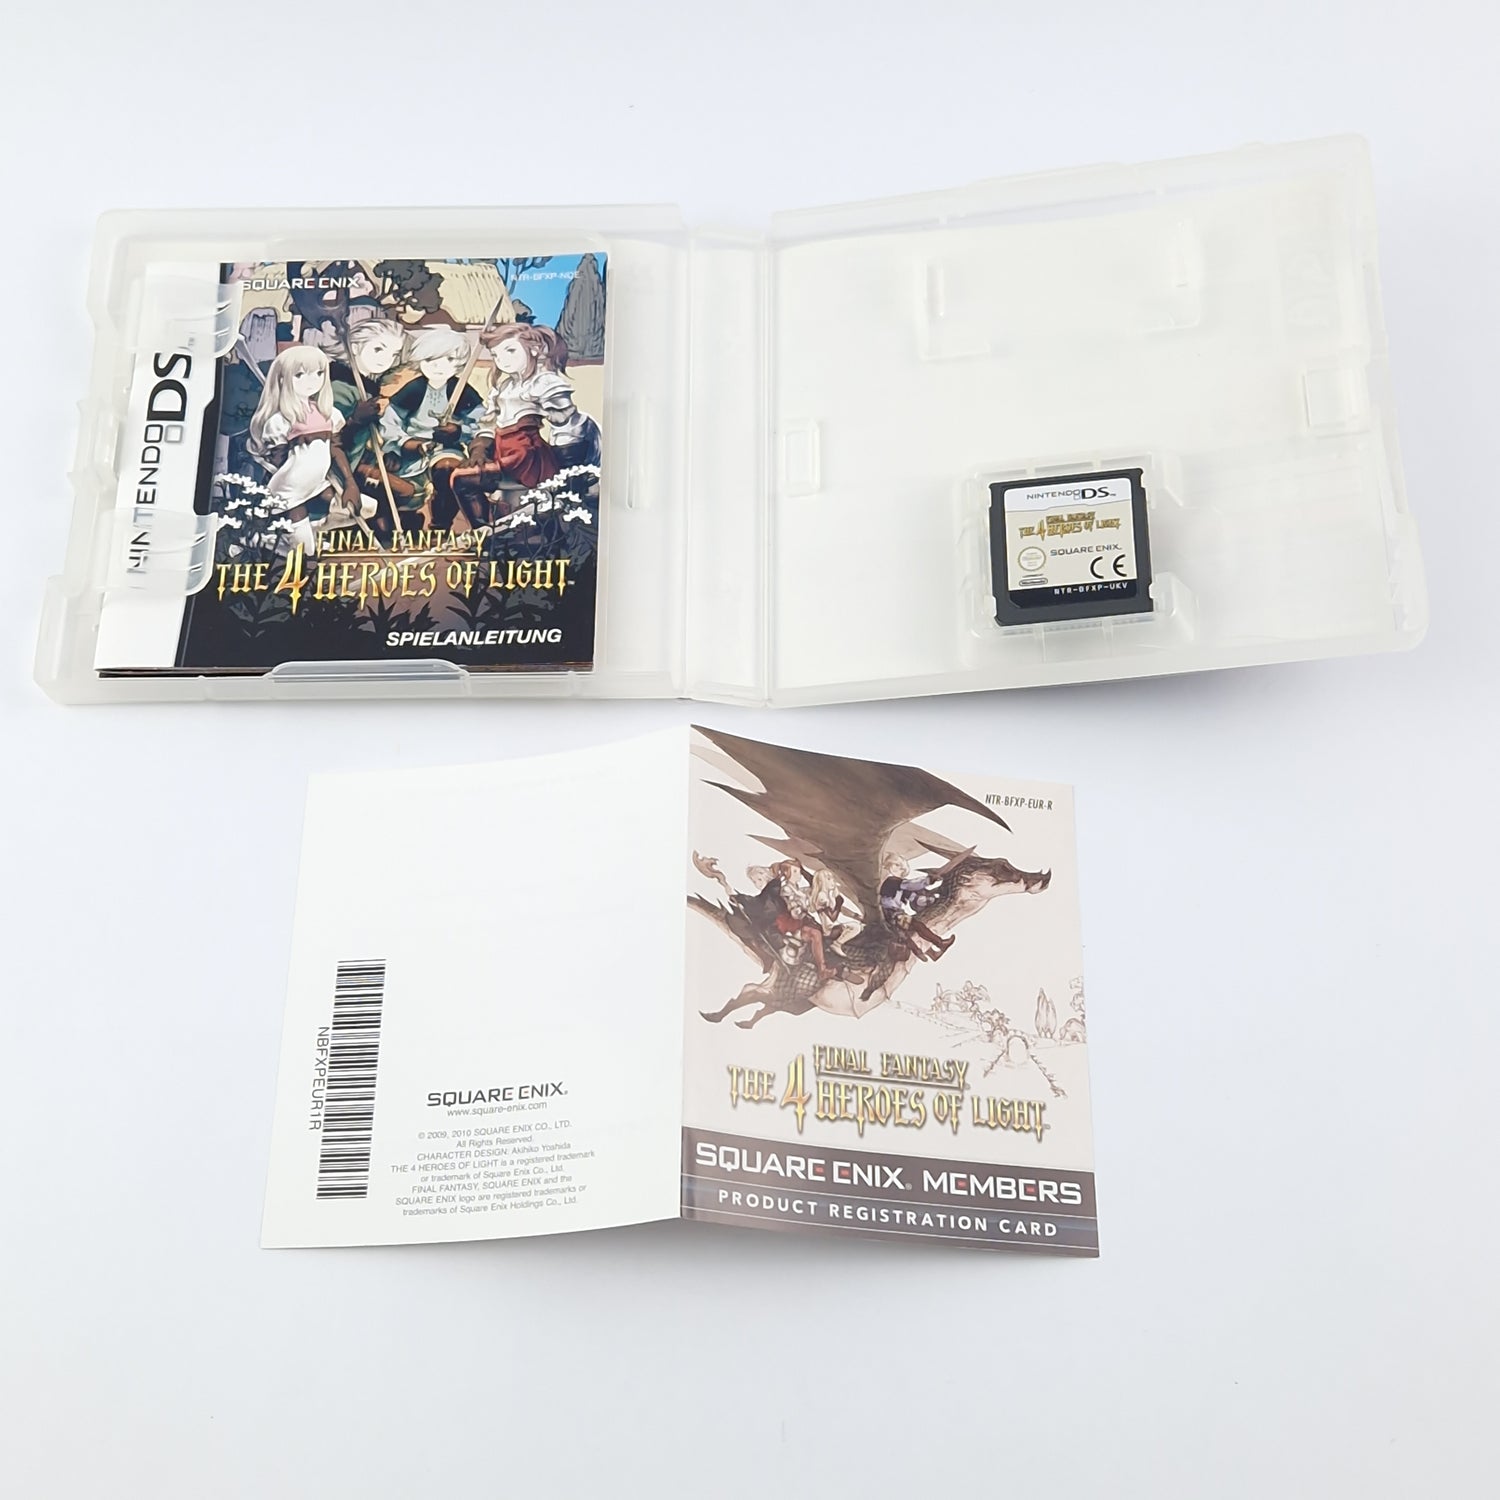 Nintendo DS Game : Final Fantasy The 4 Heroes of Light + Bradygames Guide